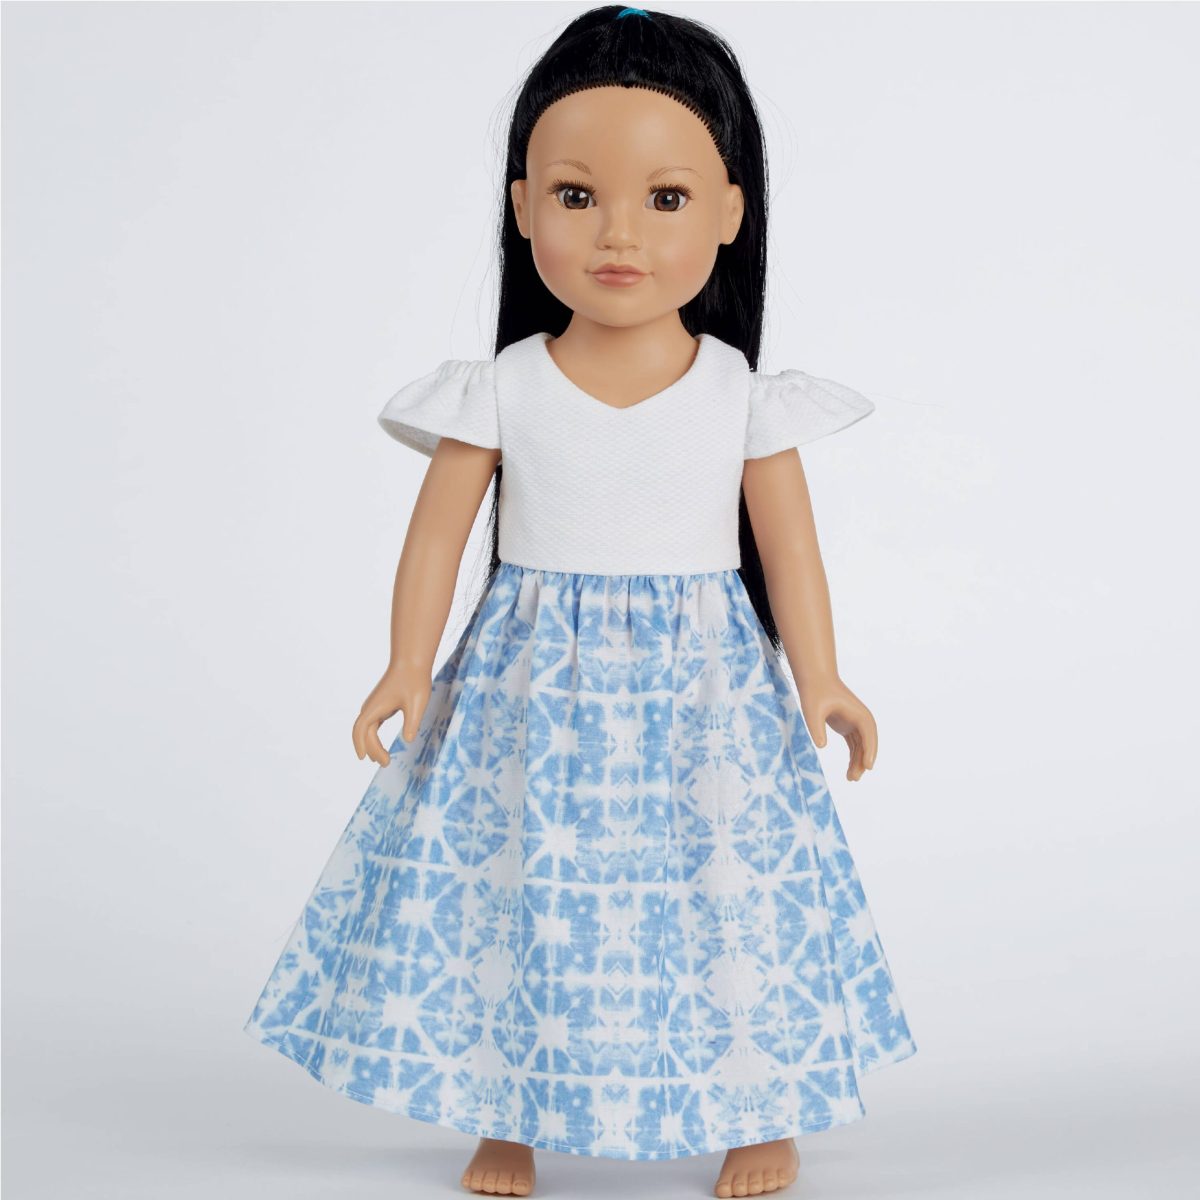 Simplicity Sewing Pattern S8903 18" Doll Clothes